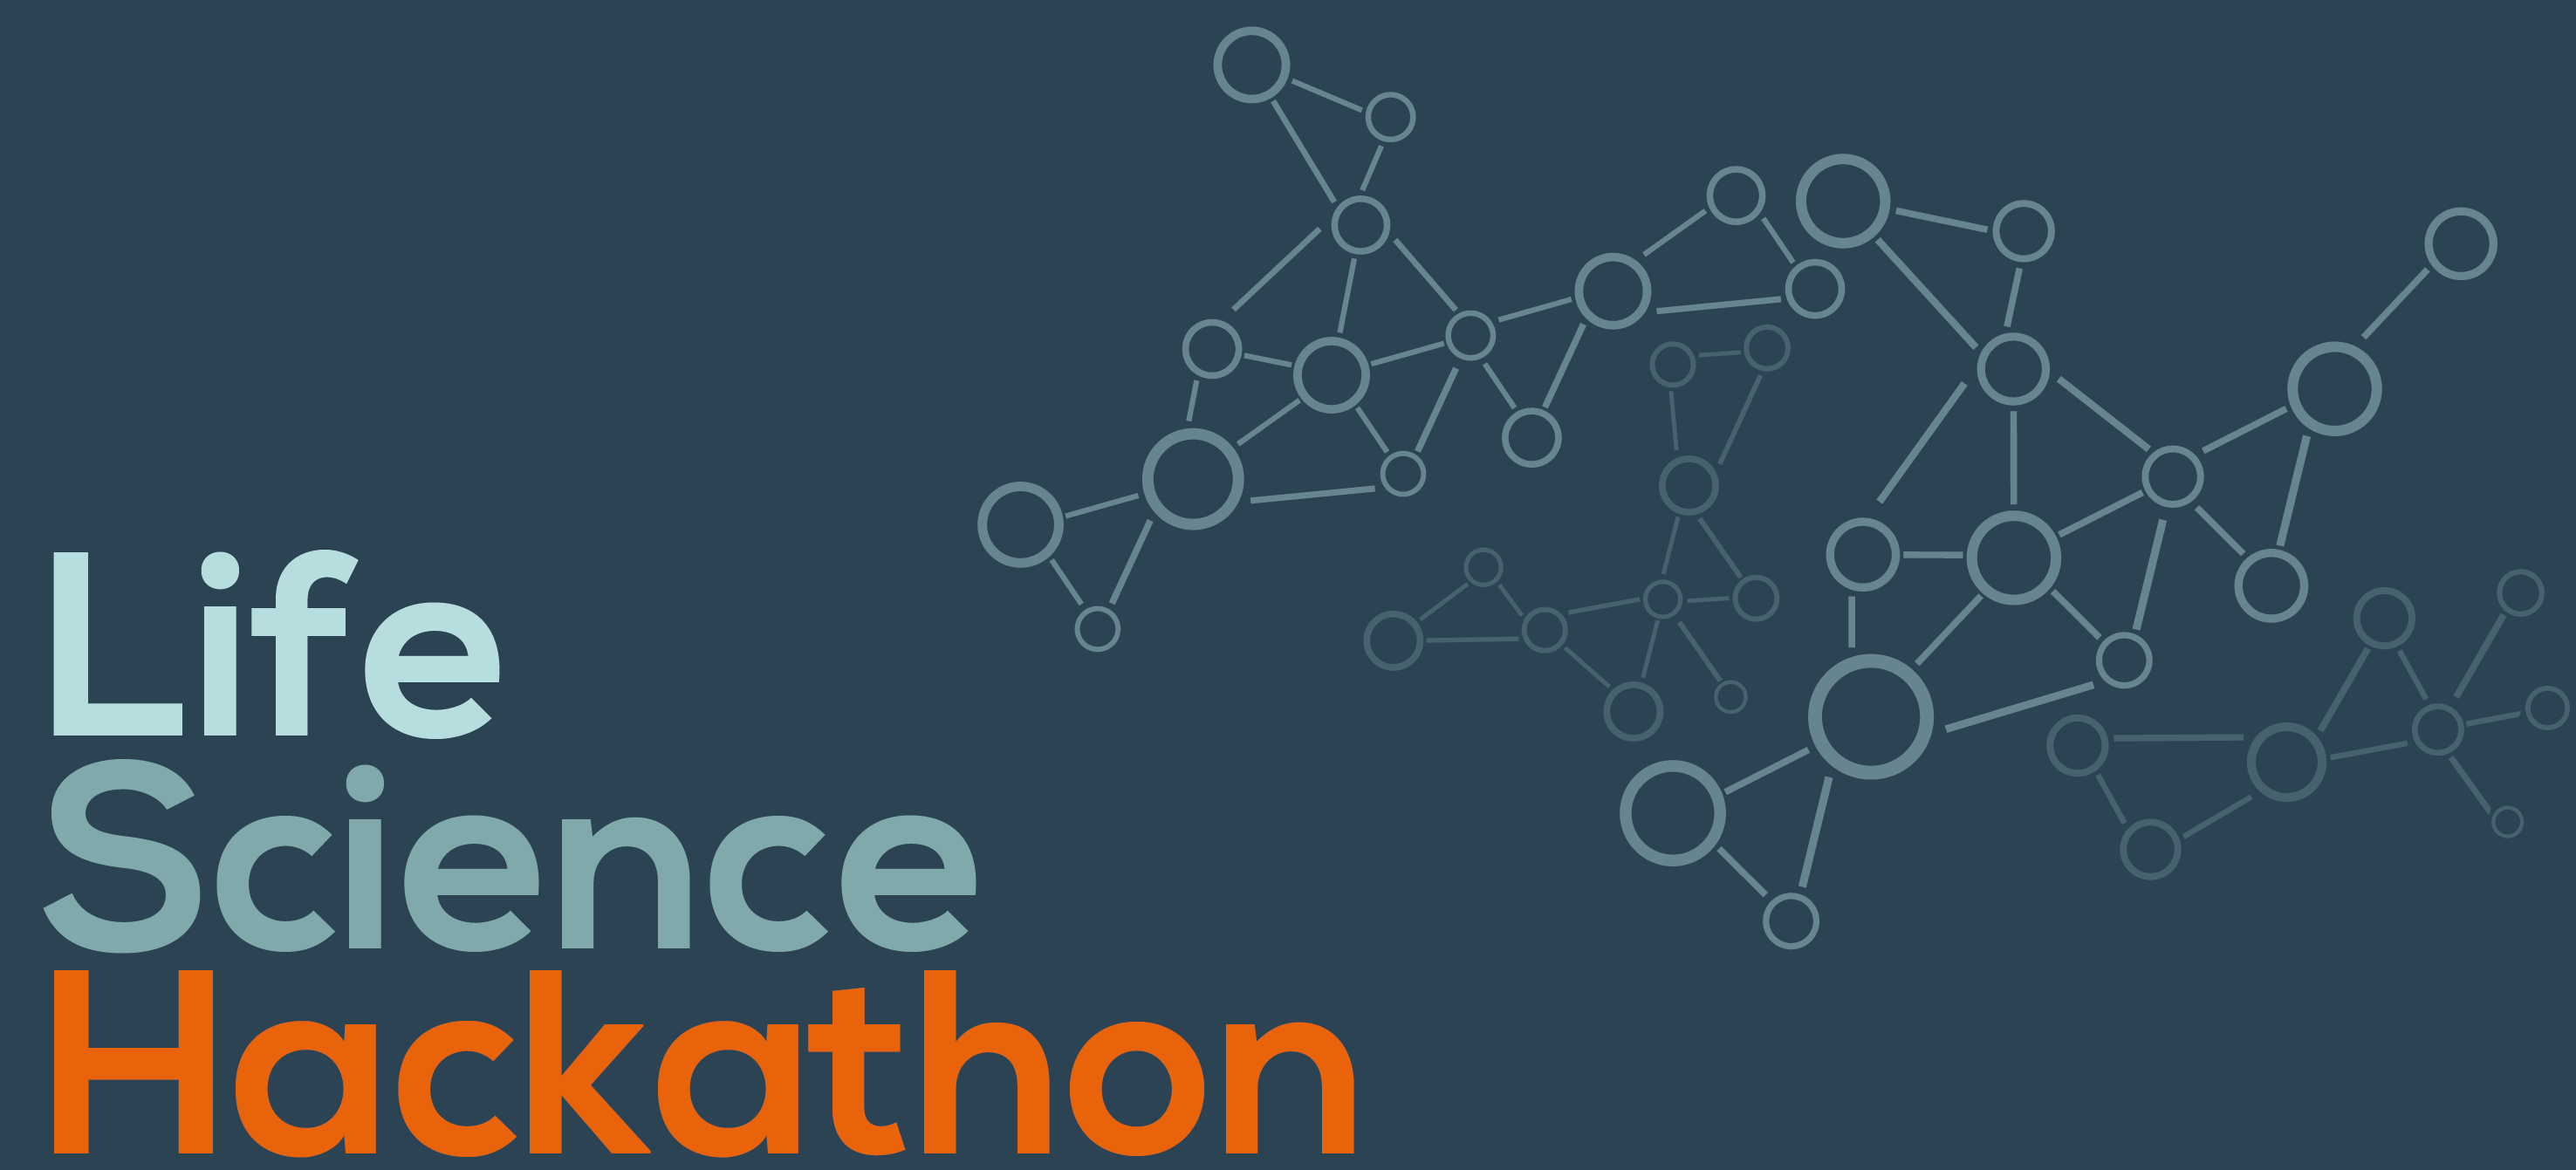 CANCELLED - Life Science Hackathon